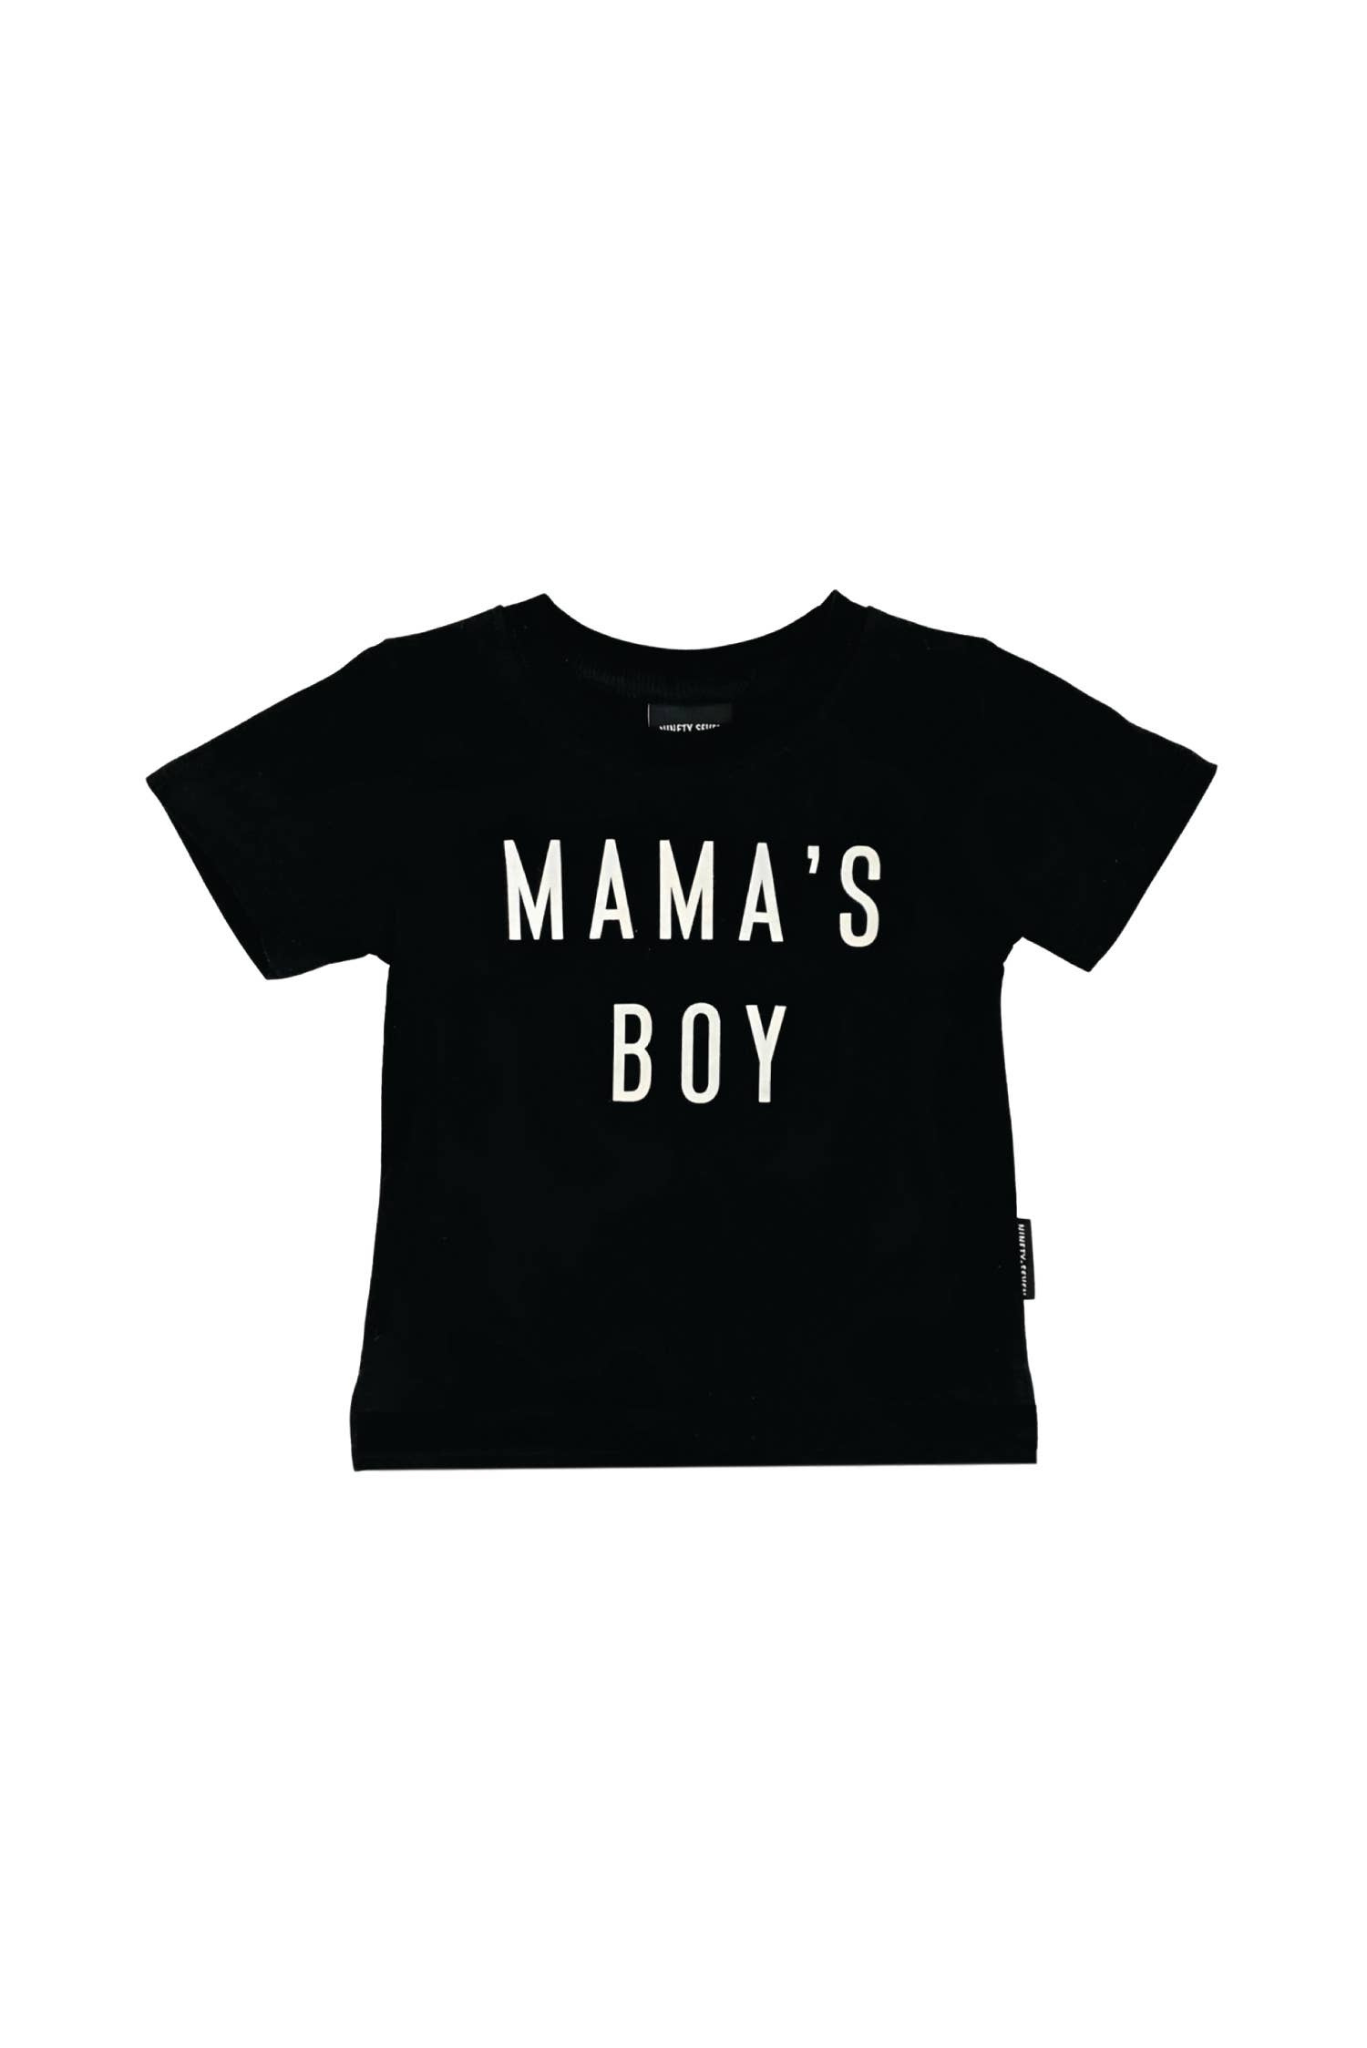 97 Design Co. - Mama's Boy - Black Kids Tee, Toddler T-shirt, Mother's Day